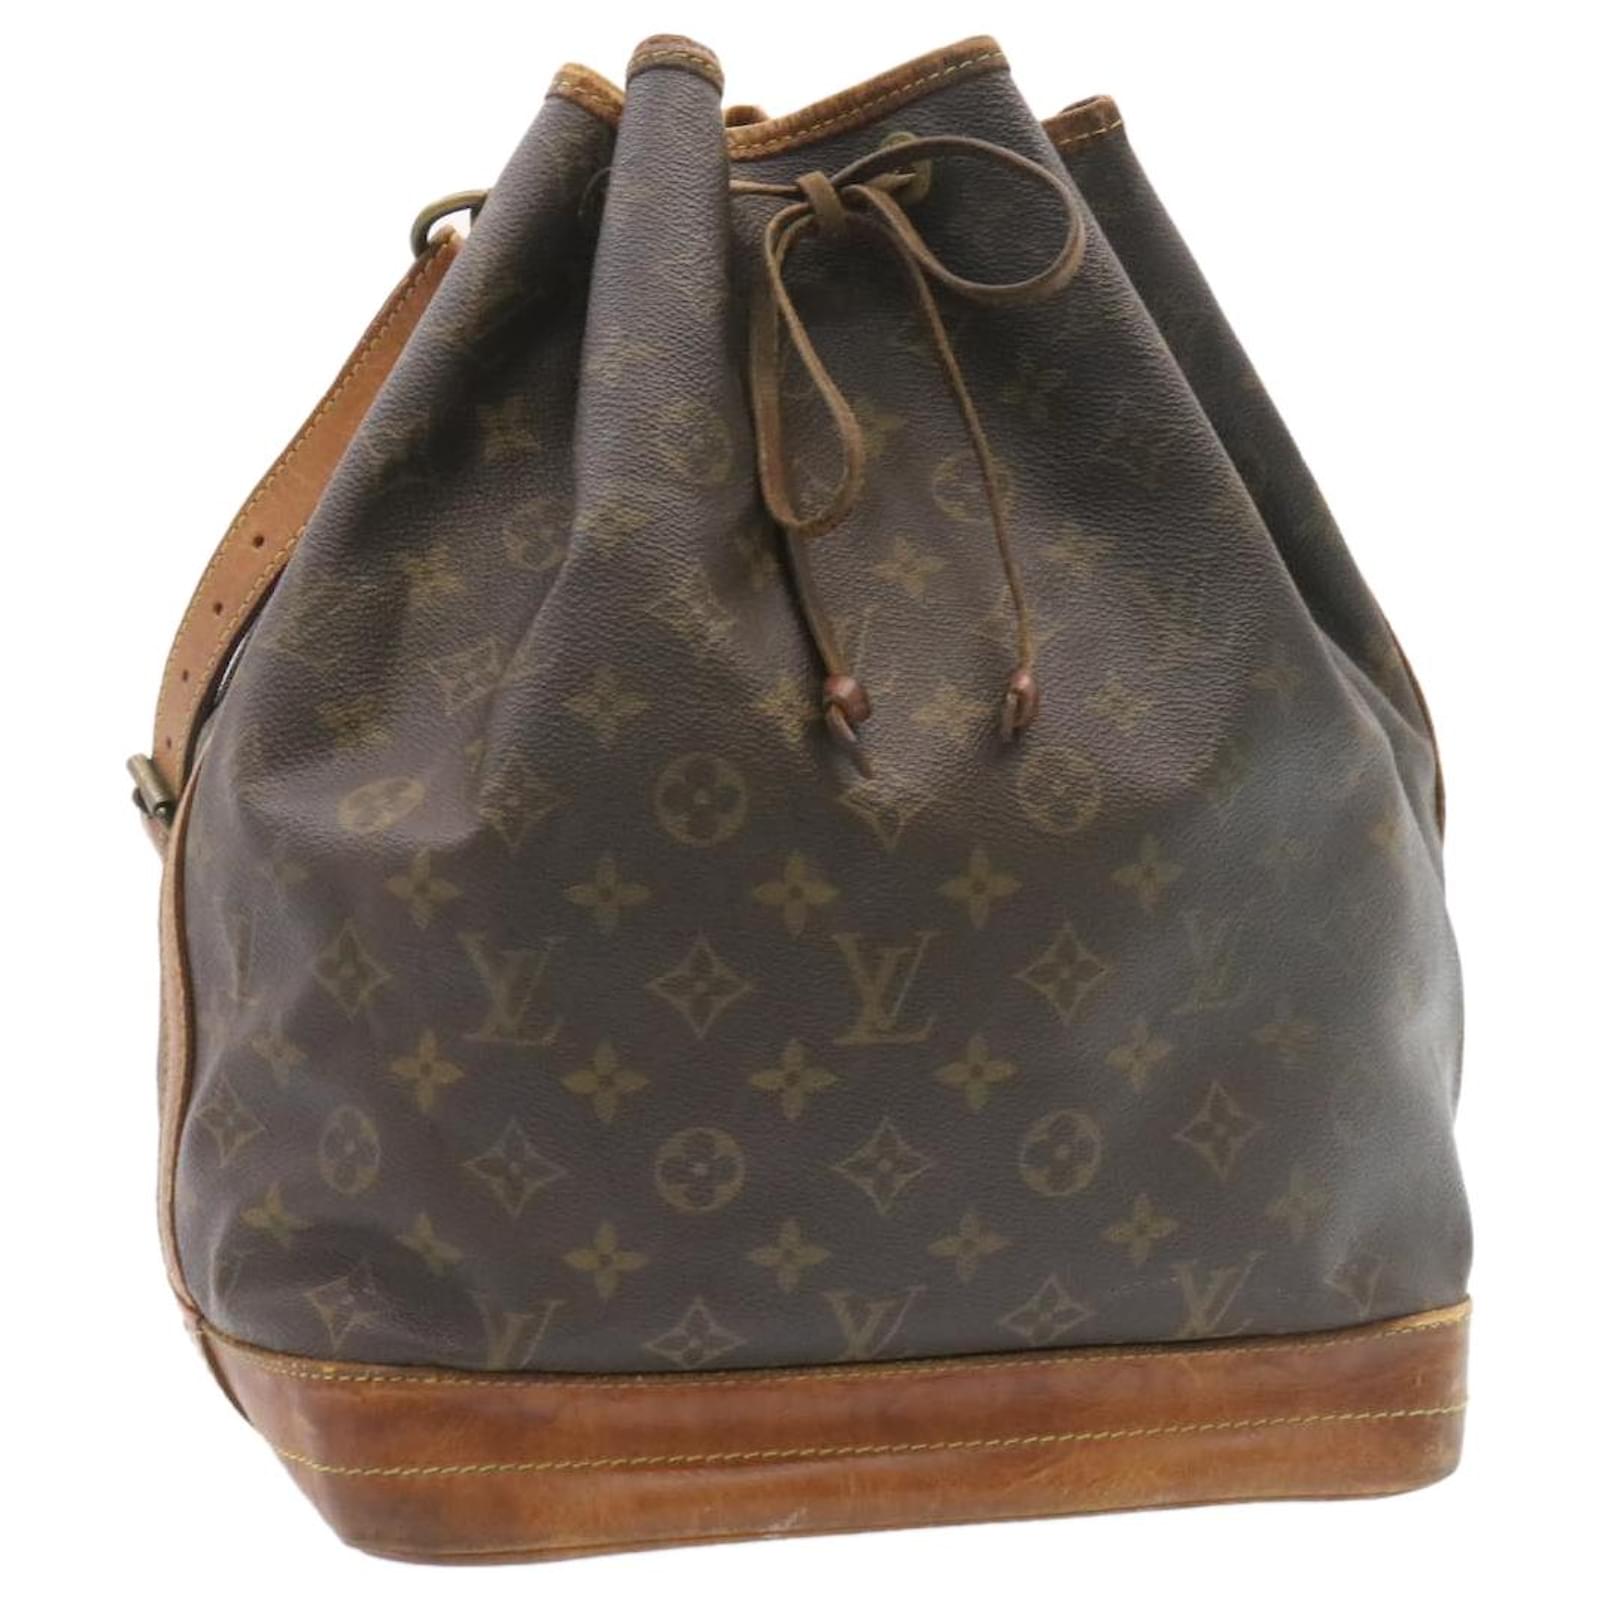 Authentic Louis Vuitton Noe PM with Luggage Tag  Fashion trends, Authentic louis  vuitton, Clothes design